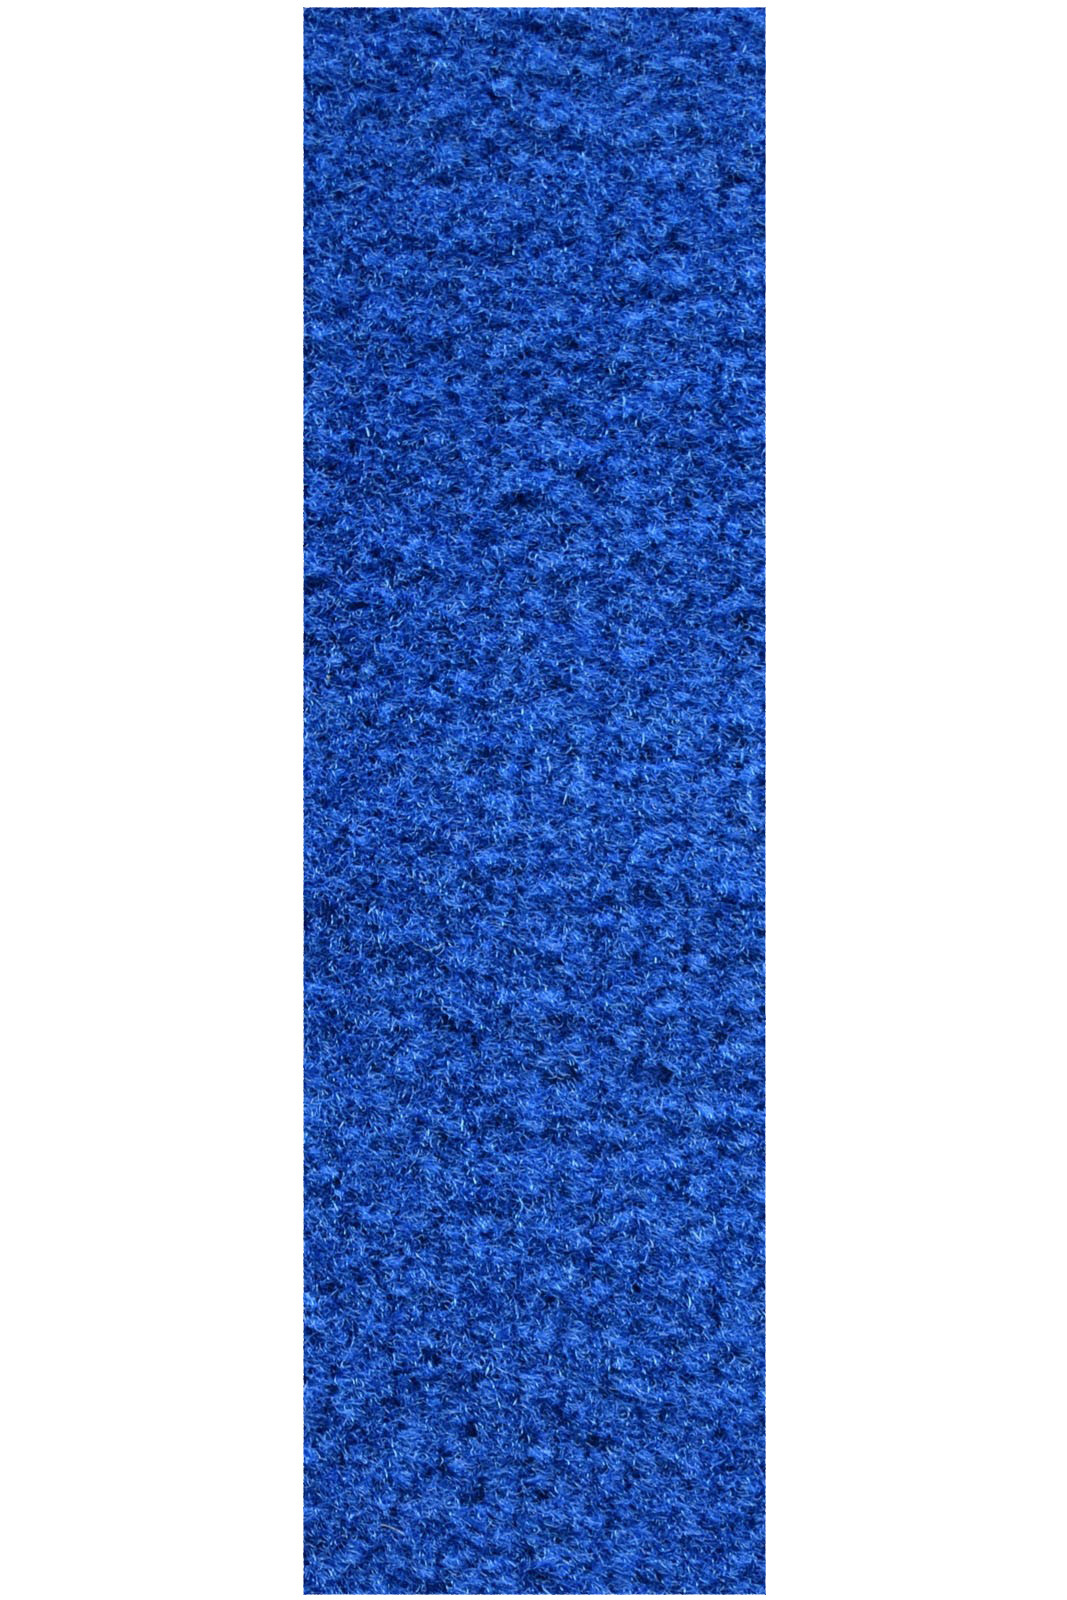 Commercial Indoor/Outdoor Blue Custom Size Runner 2' x 22' - Area Rug with Rubber Marine Backing for Patio, Porch, Deck, Boat, Basement or Garage with Premium Bound Polyester Edges - image 1 of 1